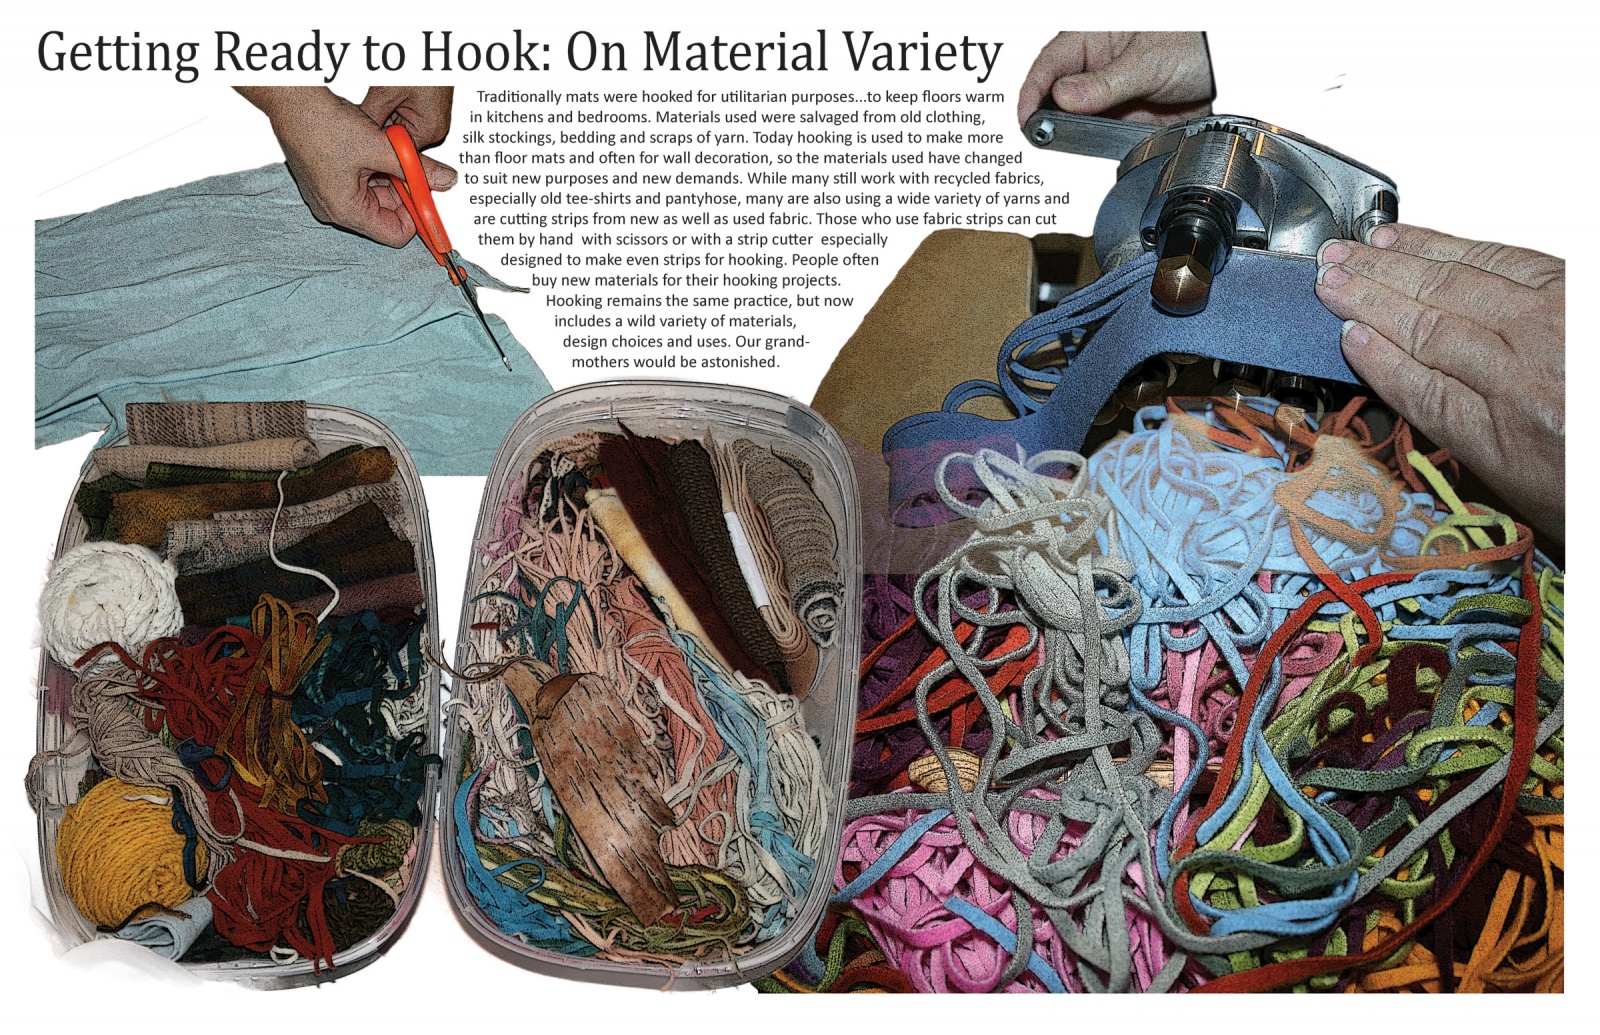 Getting Ready to Hook: On Material Variety